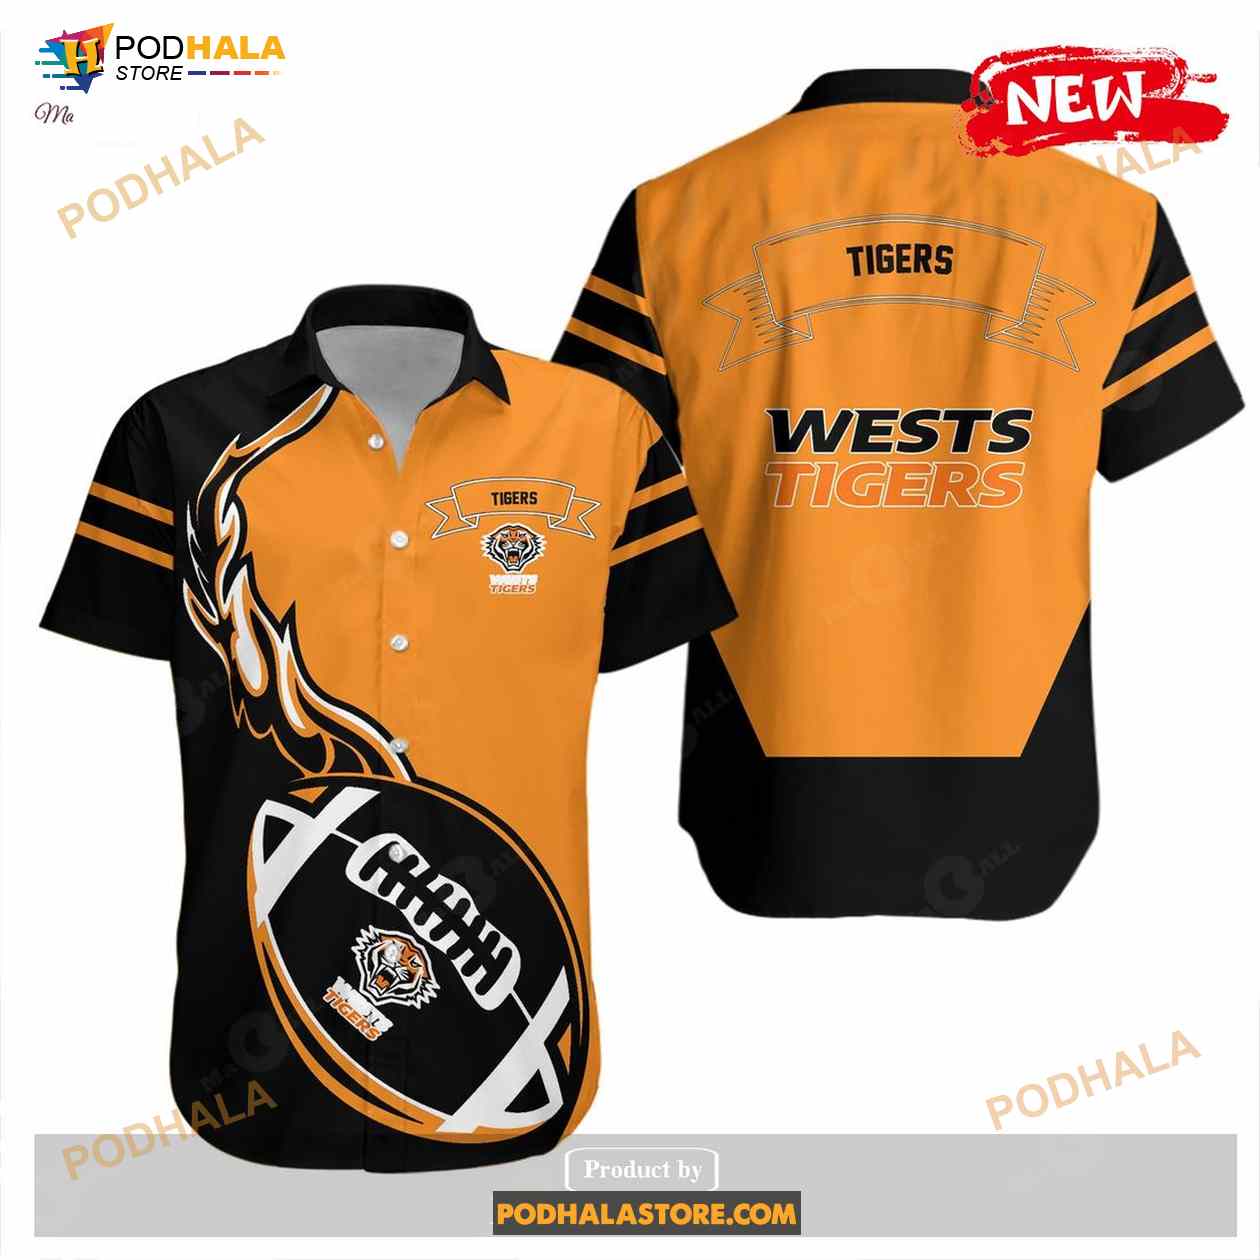 Wests Tigers NCAA Flame Ball, NRL Design Funny Hawaiian Shirt - Bring Your  Ideas, Thoughts And Imaginations Into Reality Today